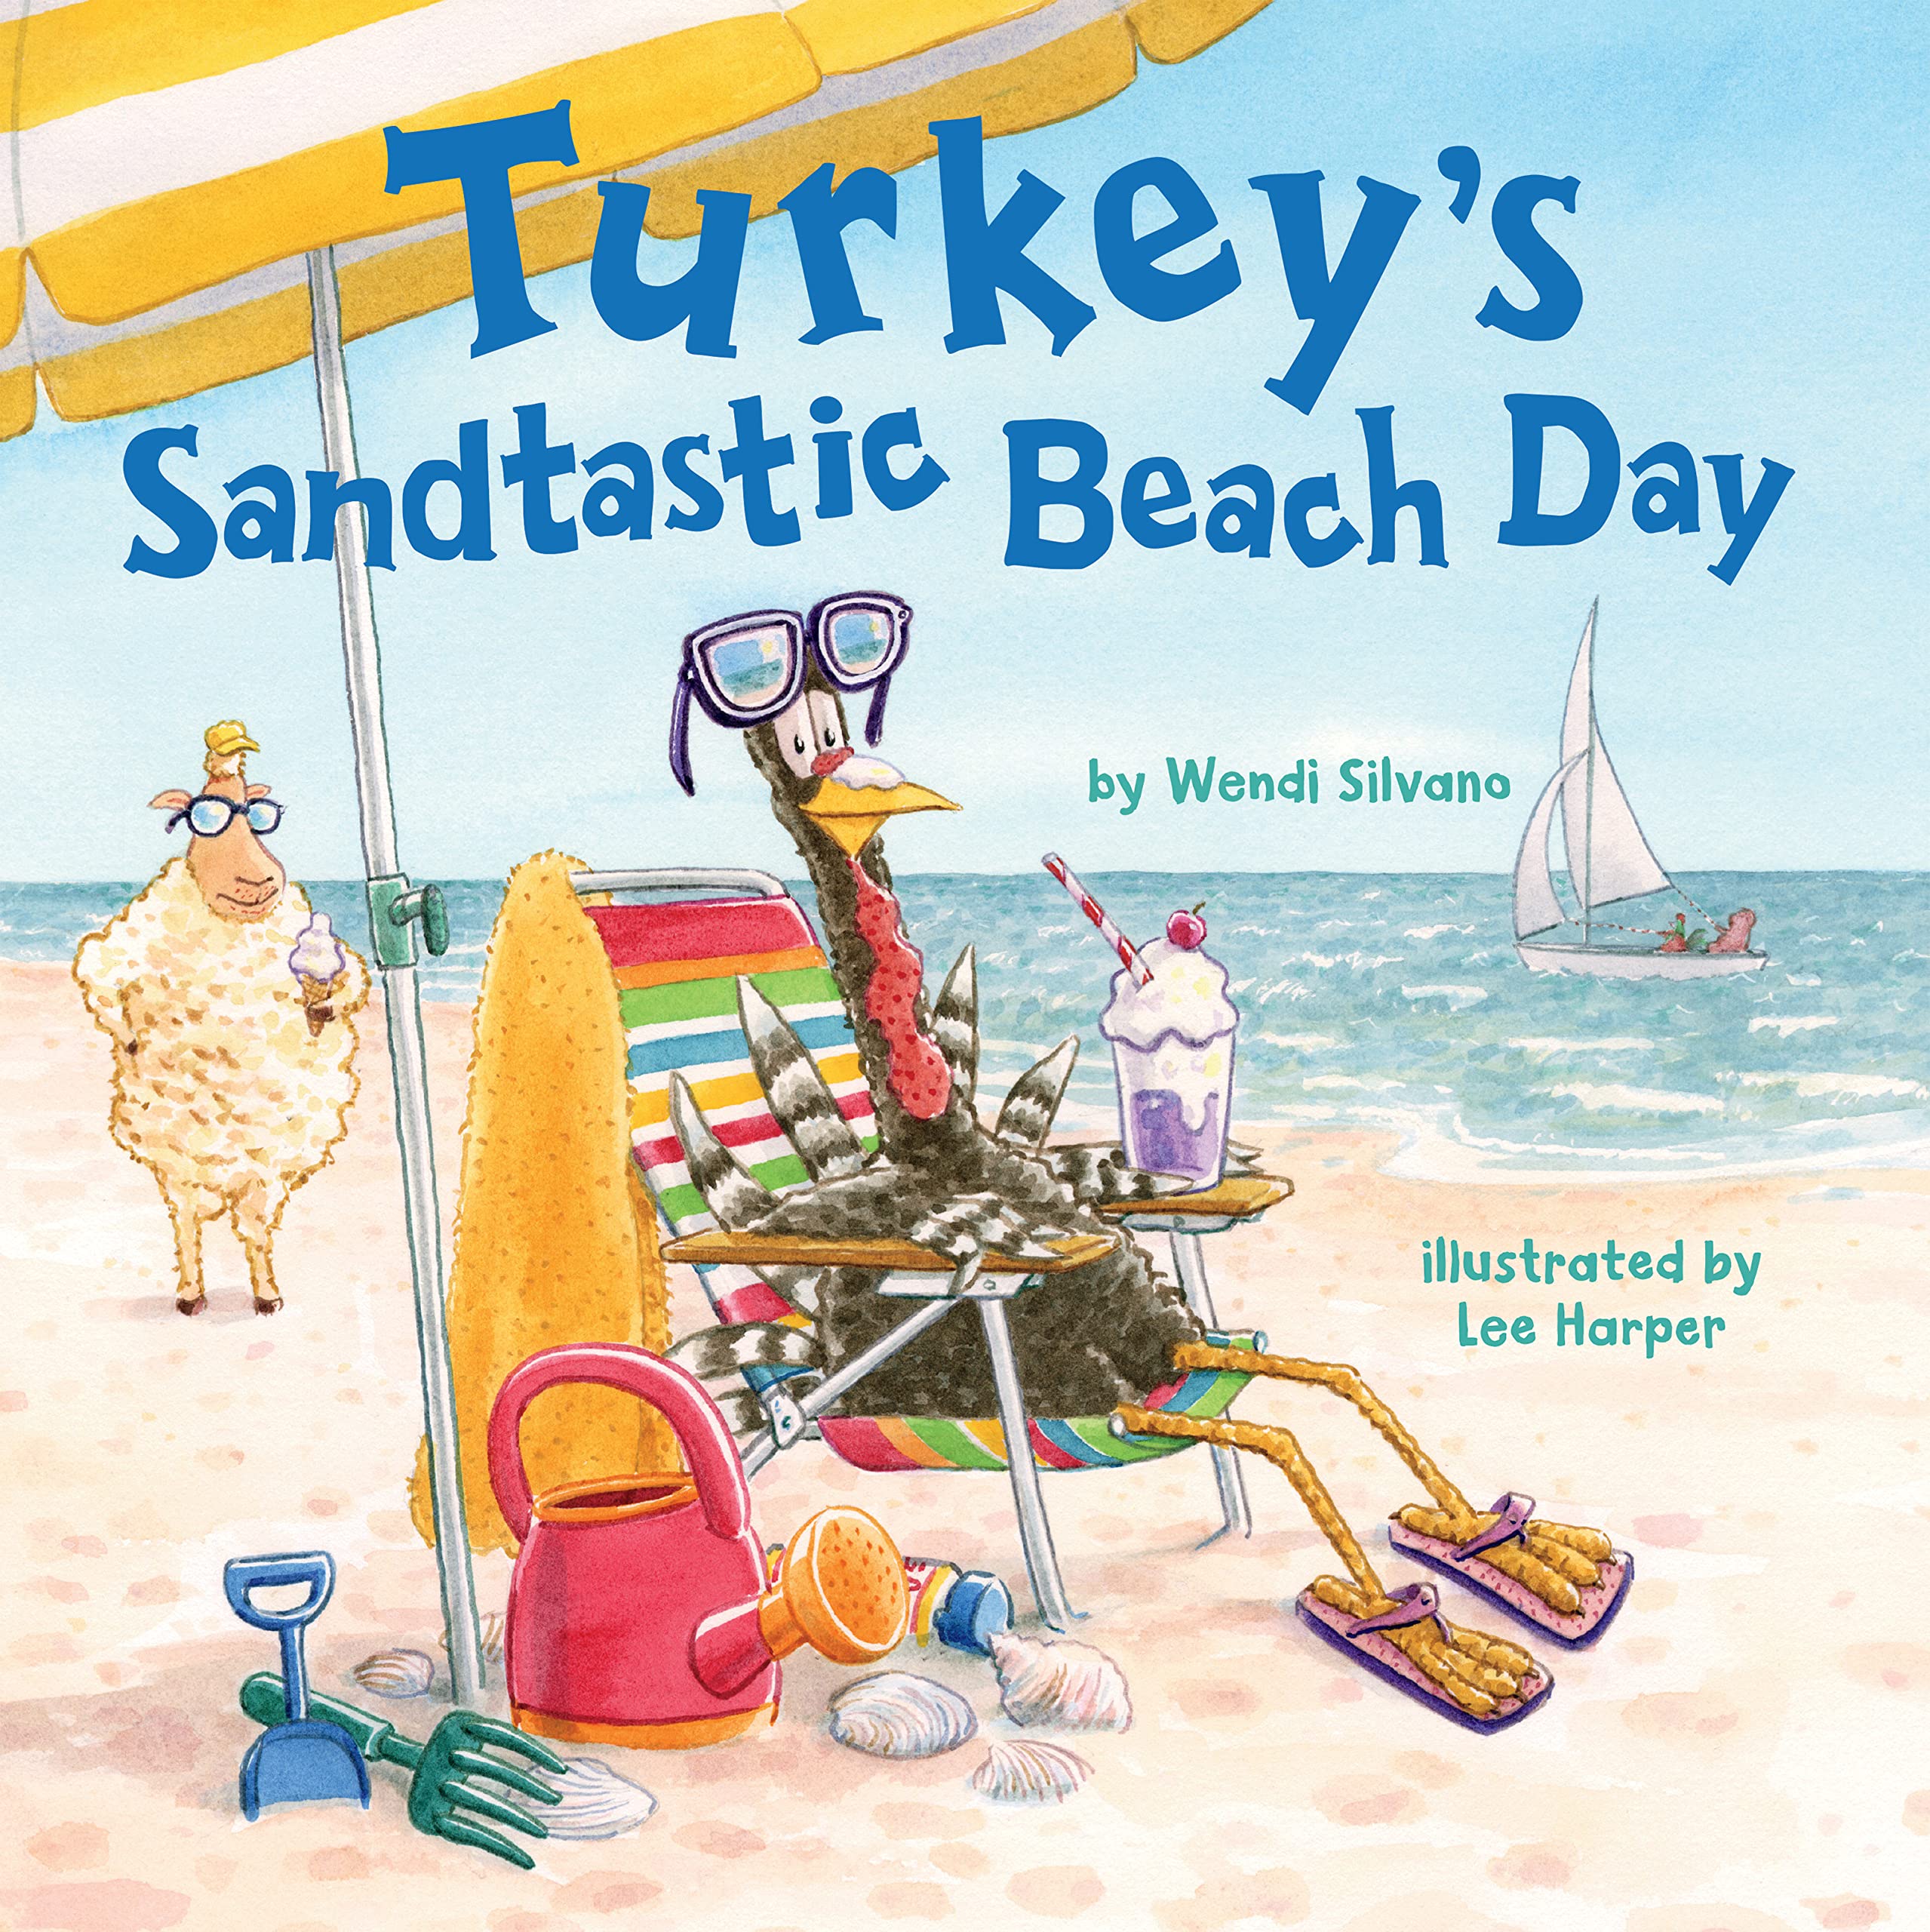 celebrate-picture-books-picture-book-review-turkey's-sandtastic-beach-day-cover